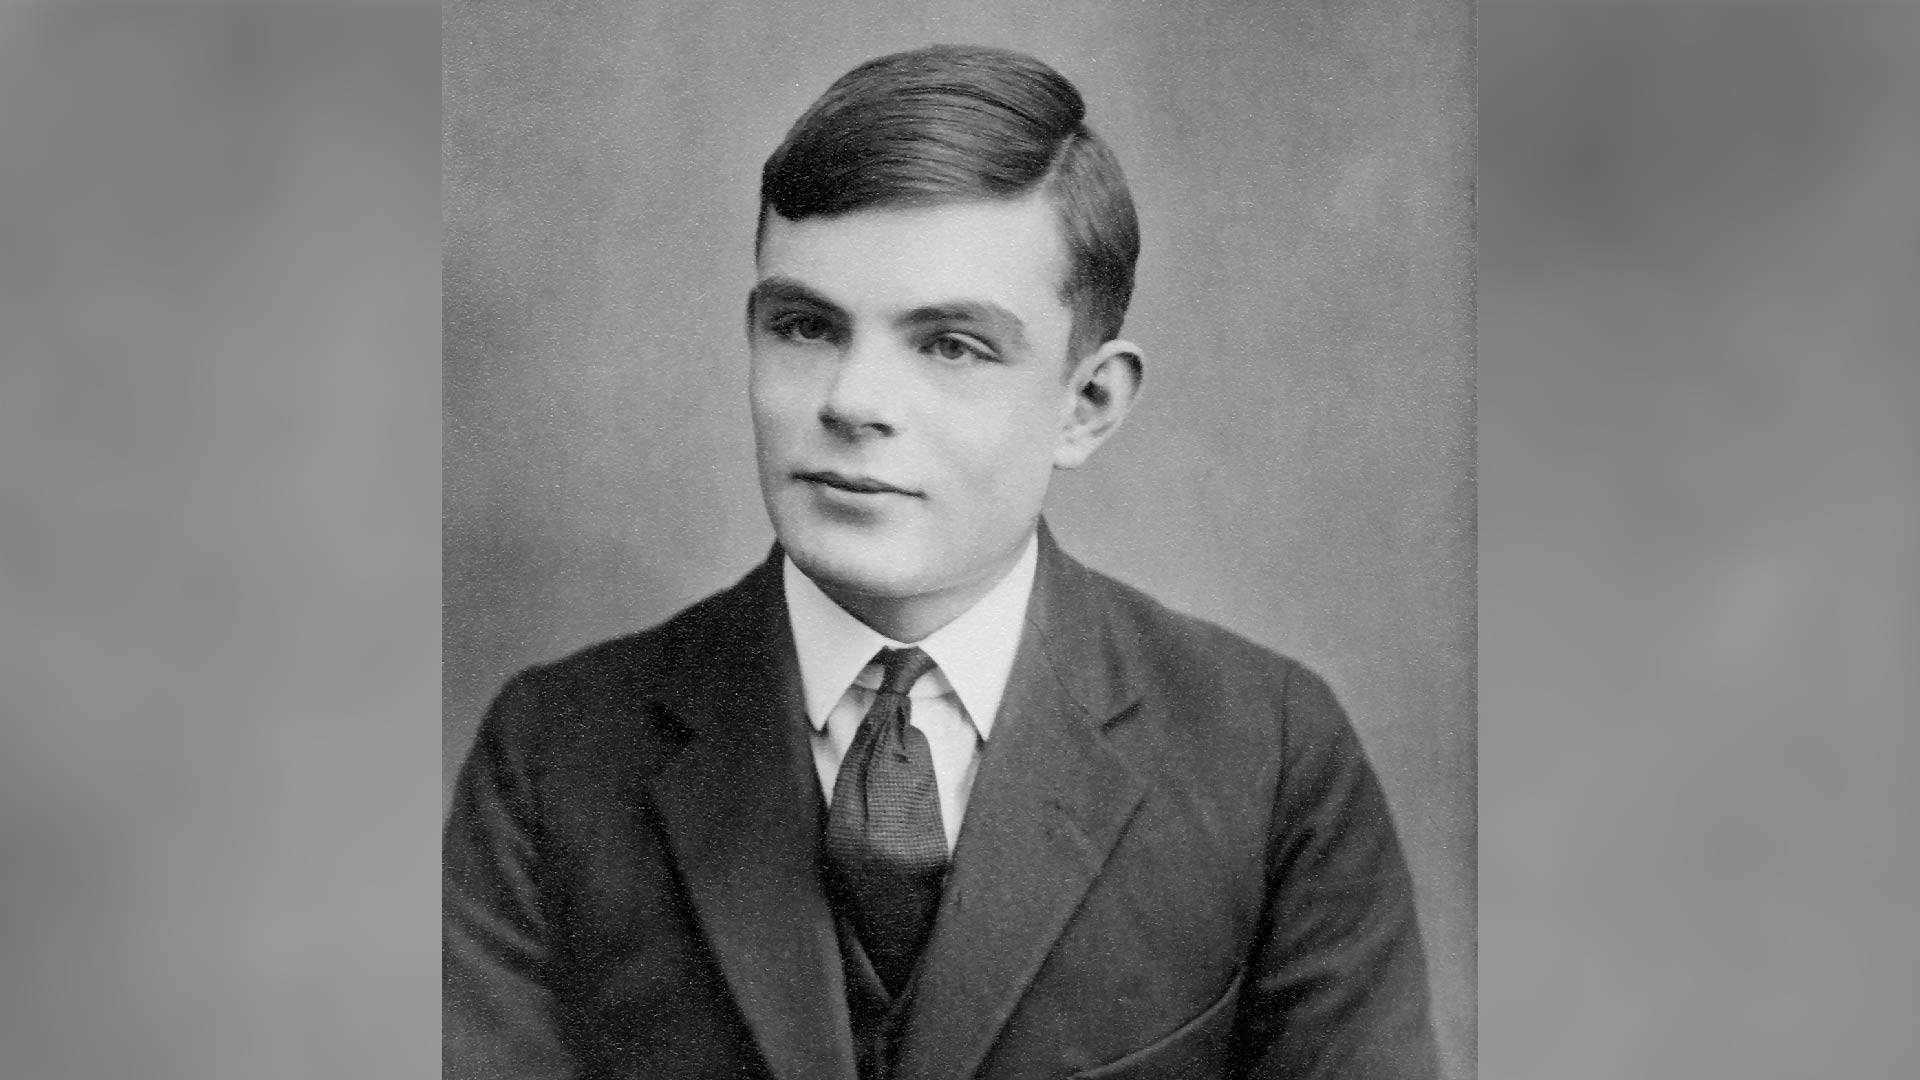 A black and white photo of Alan Turing